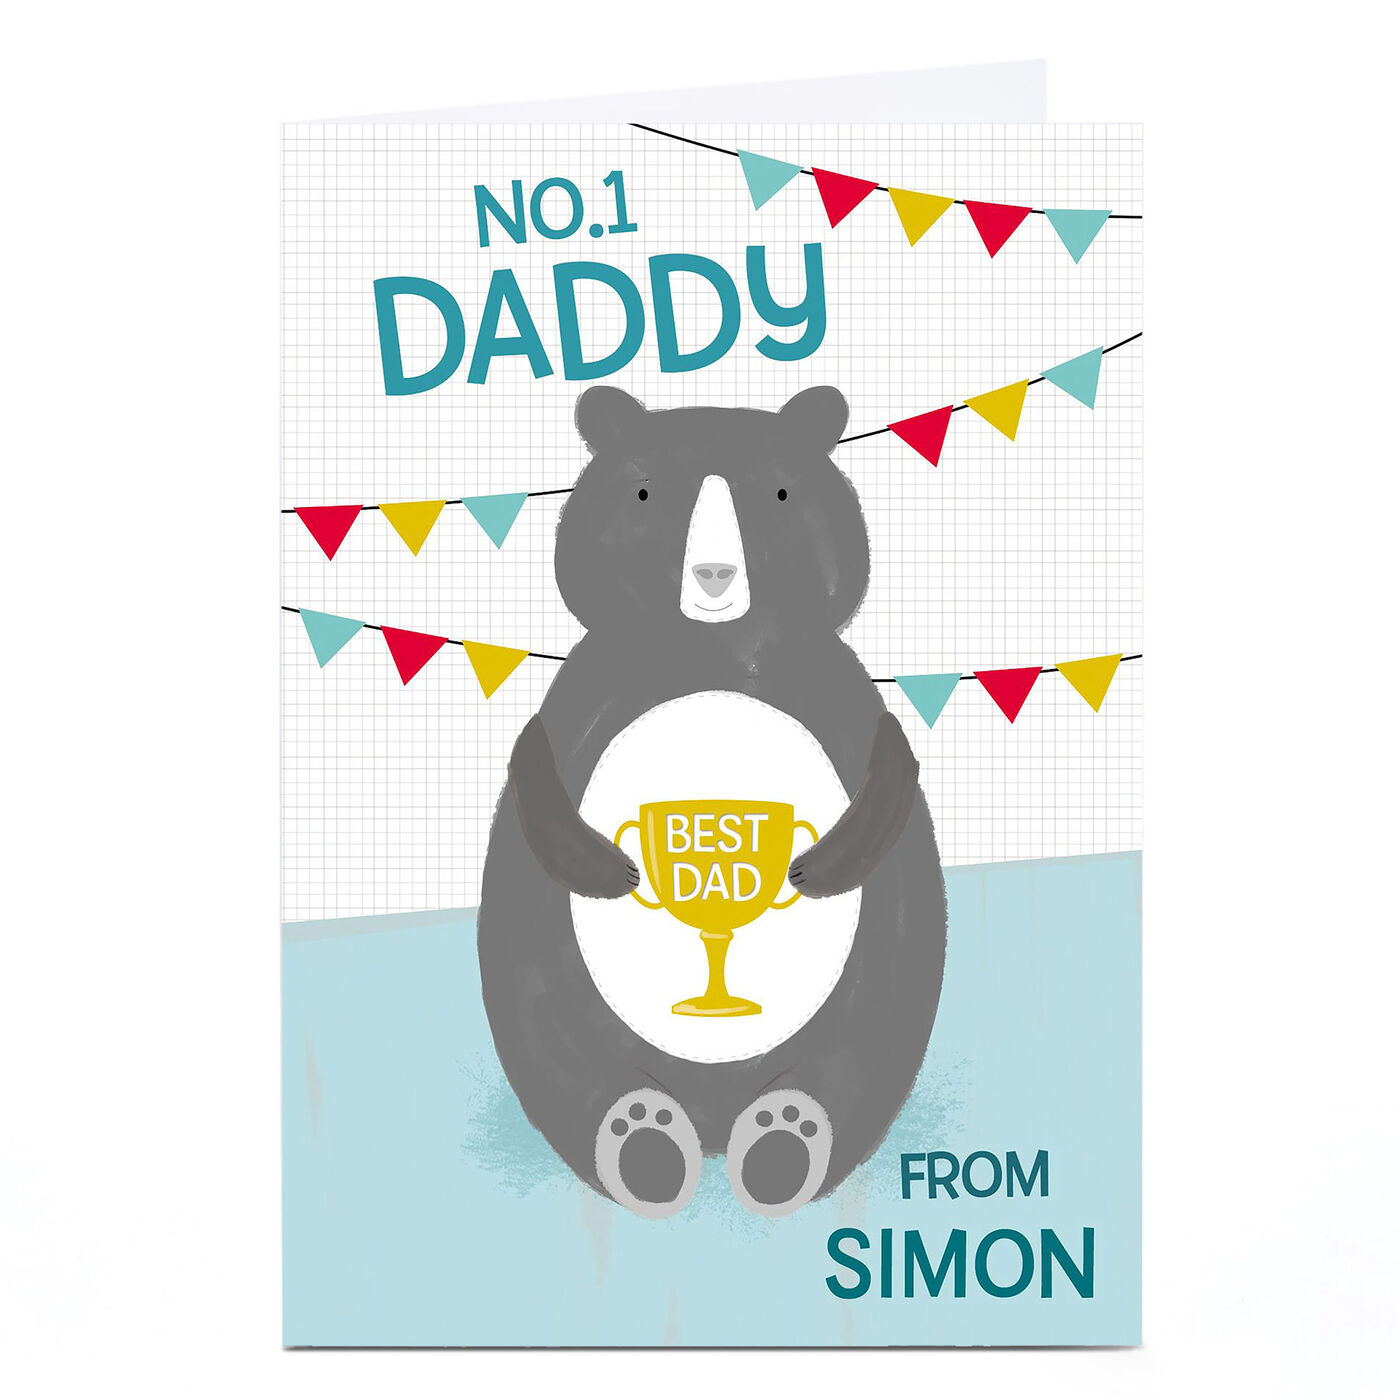 Buy Personalised Father S Day Card No1 Daddy For Gbp 1 79 Card Factory Uk